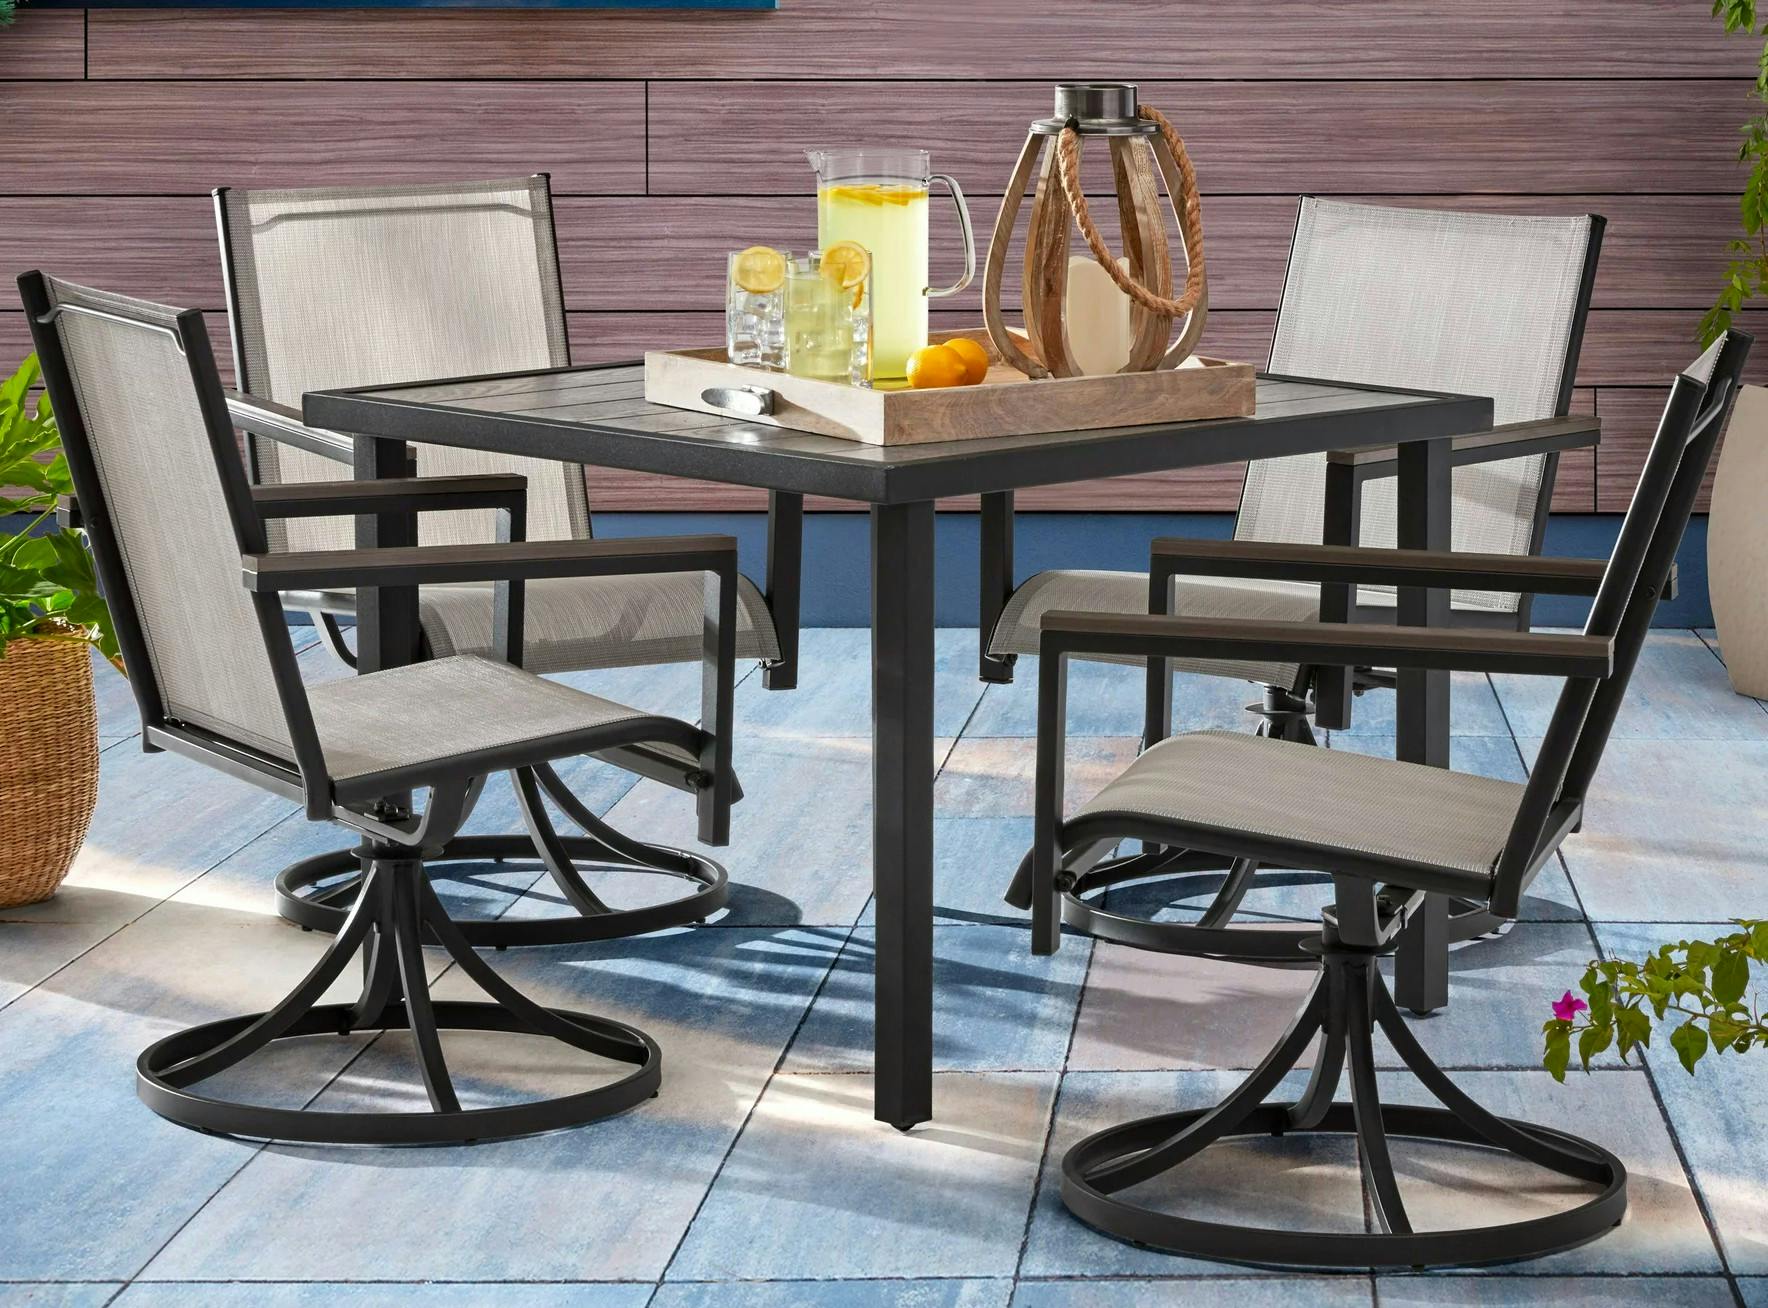 5-Piece Patio Set Clearance — 60% Off at Walmart - The Krazy Coupon Lady